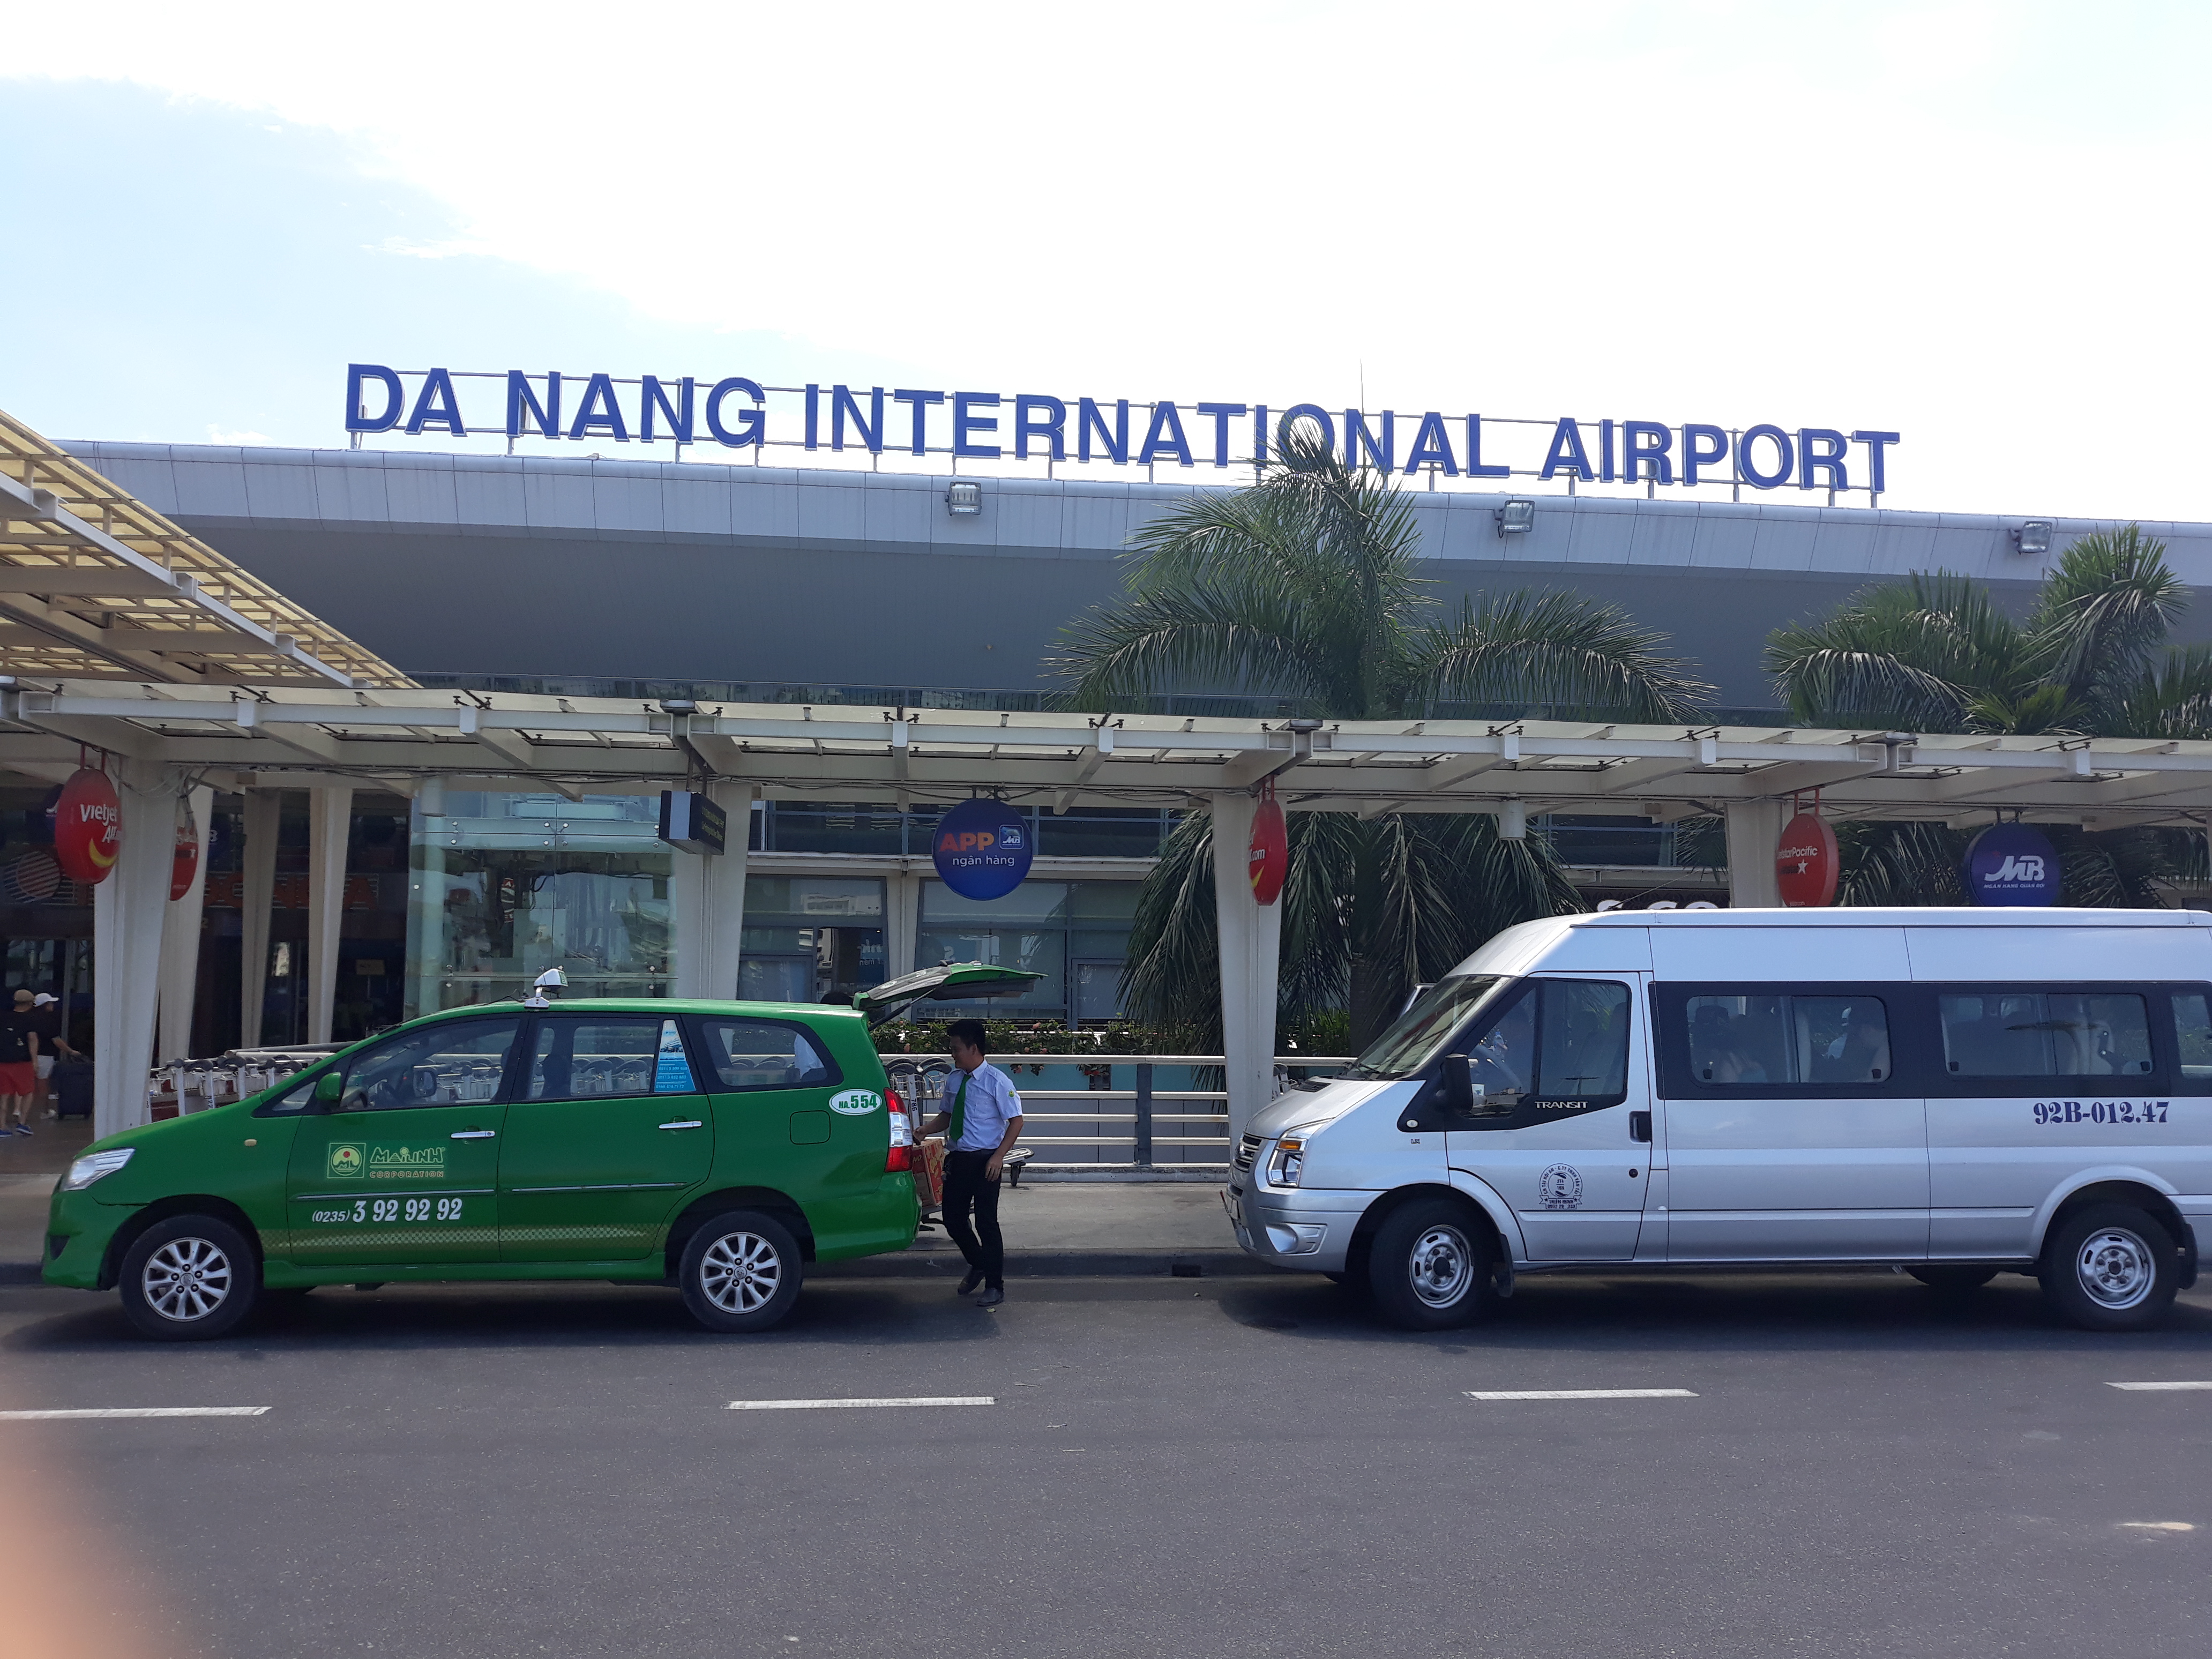 Which Kind Of Visa To Enter Vietnam Through Da Nang Airport And How To Get It?